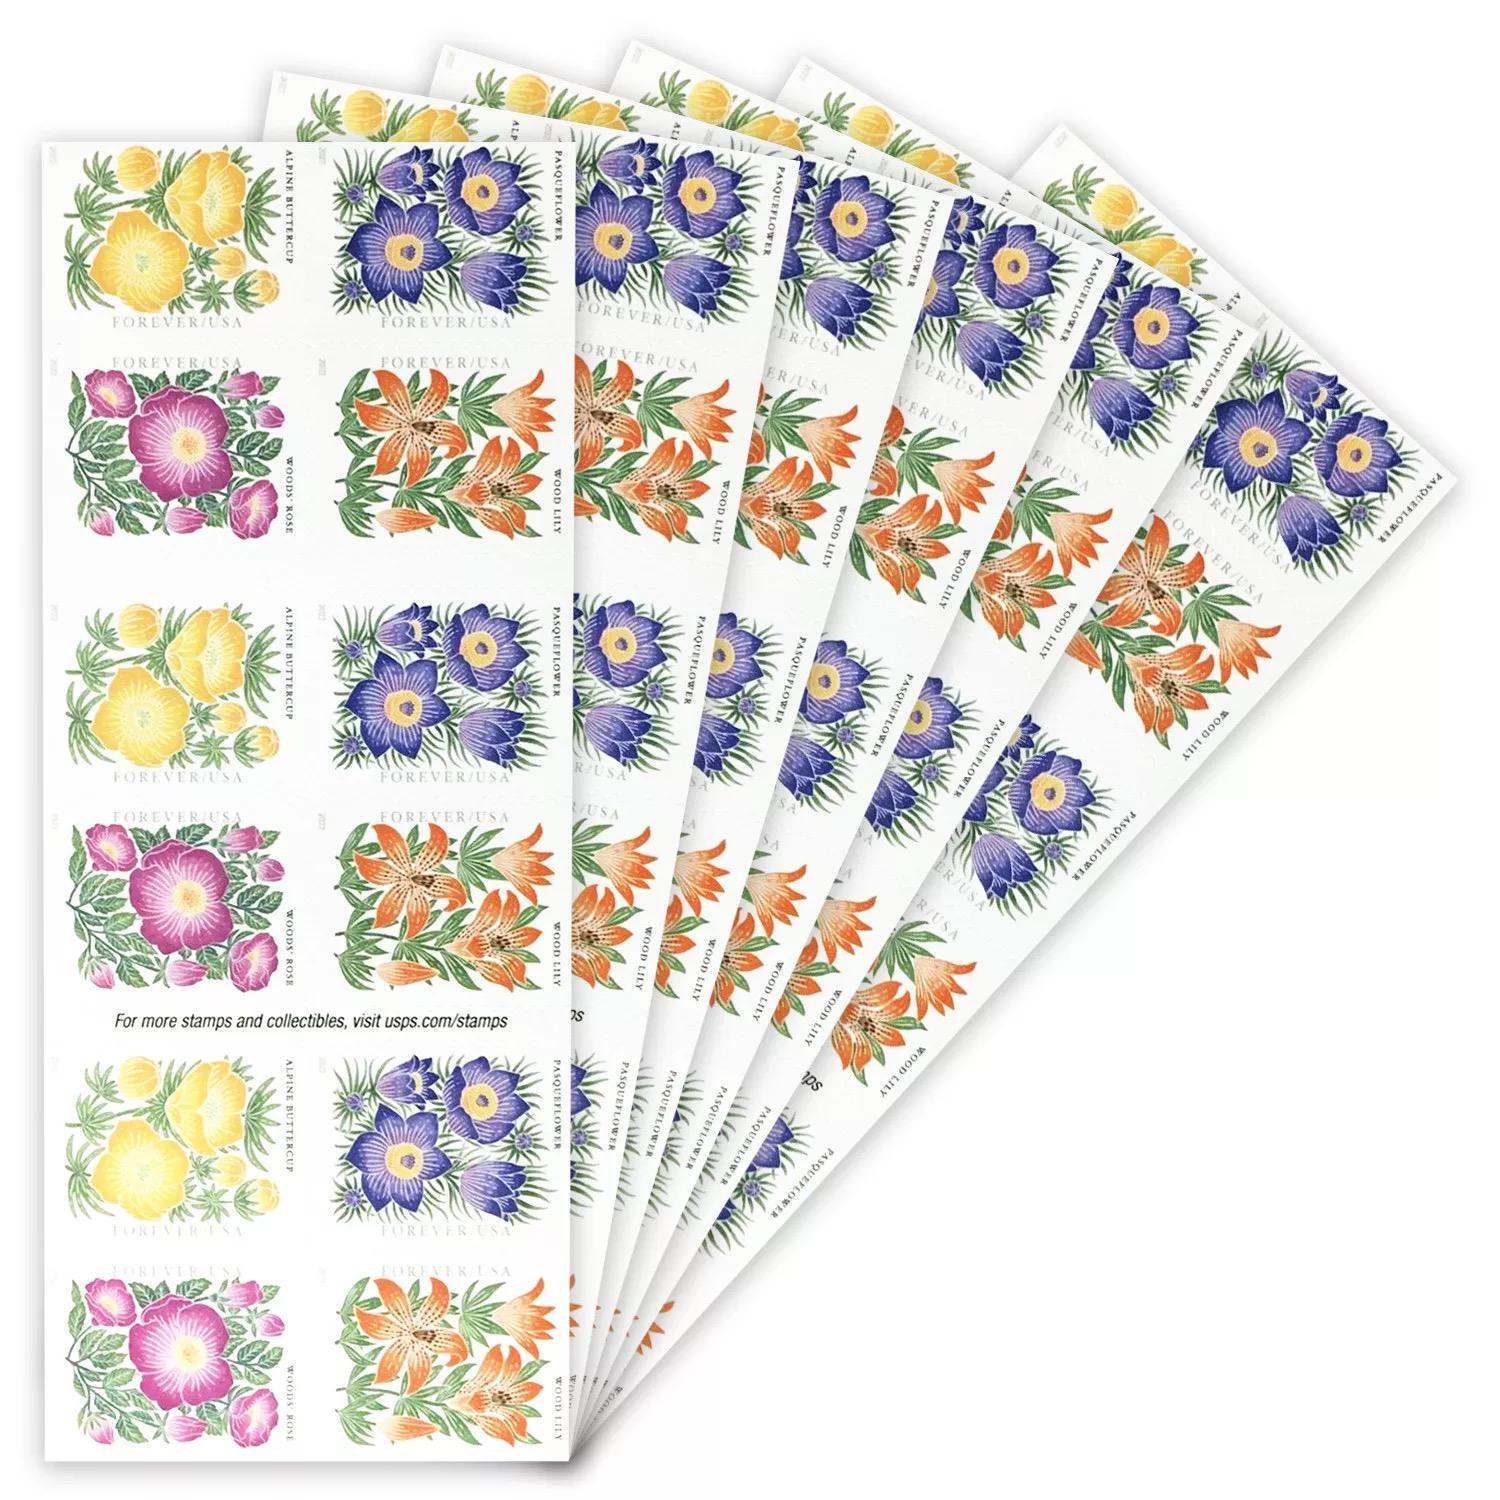 A booklet of Mountain Flora 2022 postage stamps featuring four varieties of colorful mountain flora arranged in uniform rows. Each stamp is labeled with the flower's name and denomination.